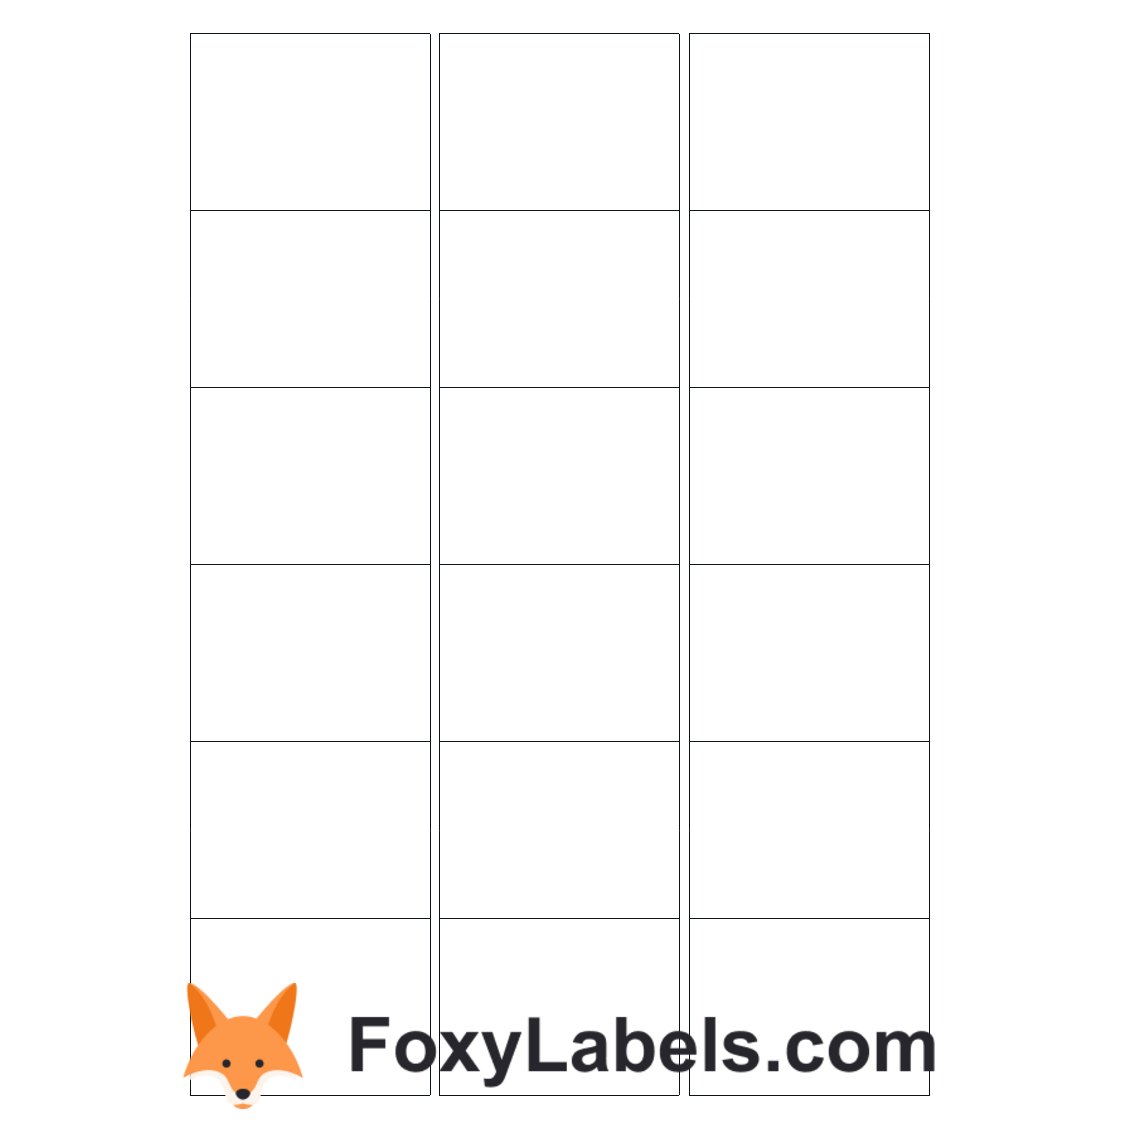 Avery-Zweckform L6025 label template for Google Docs